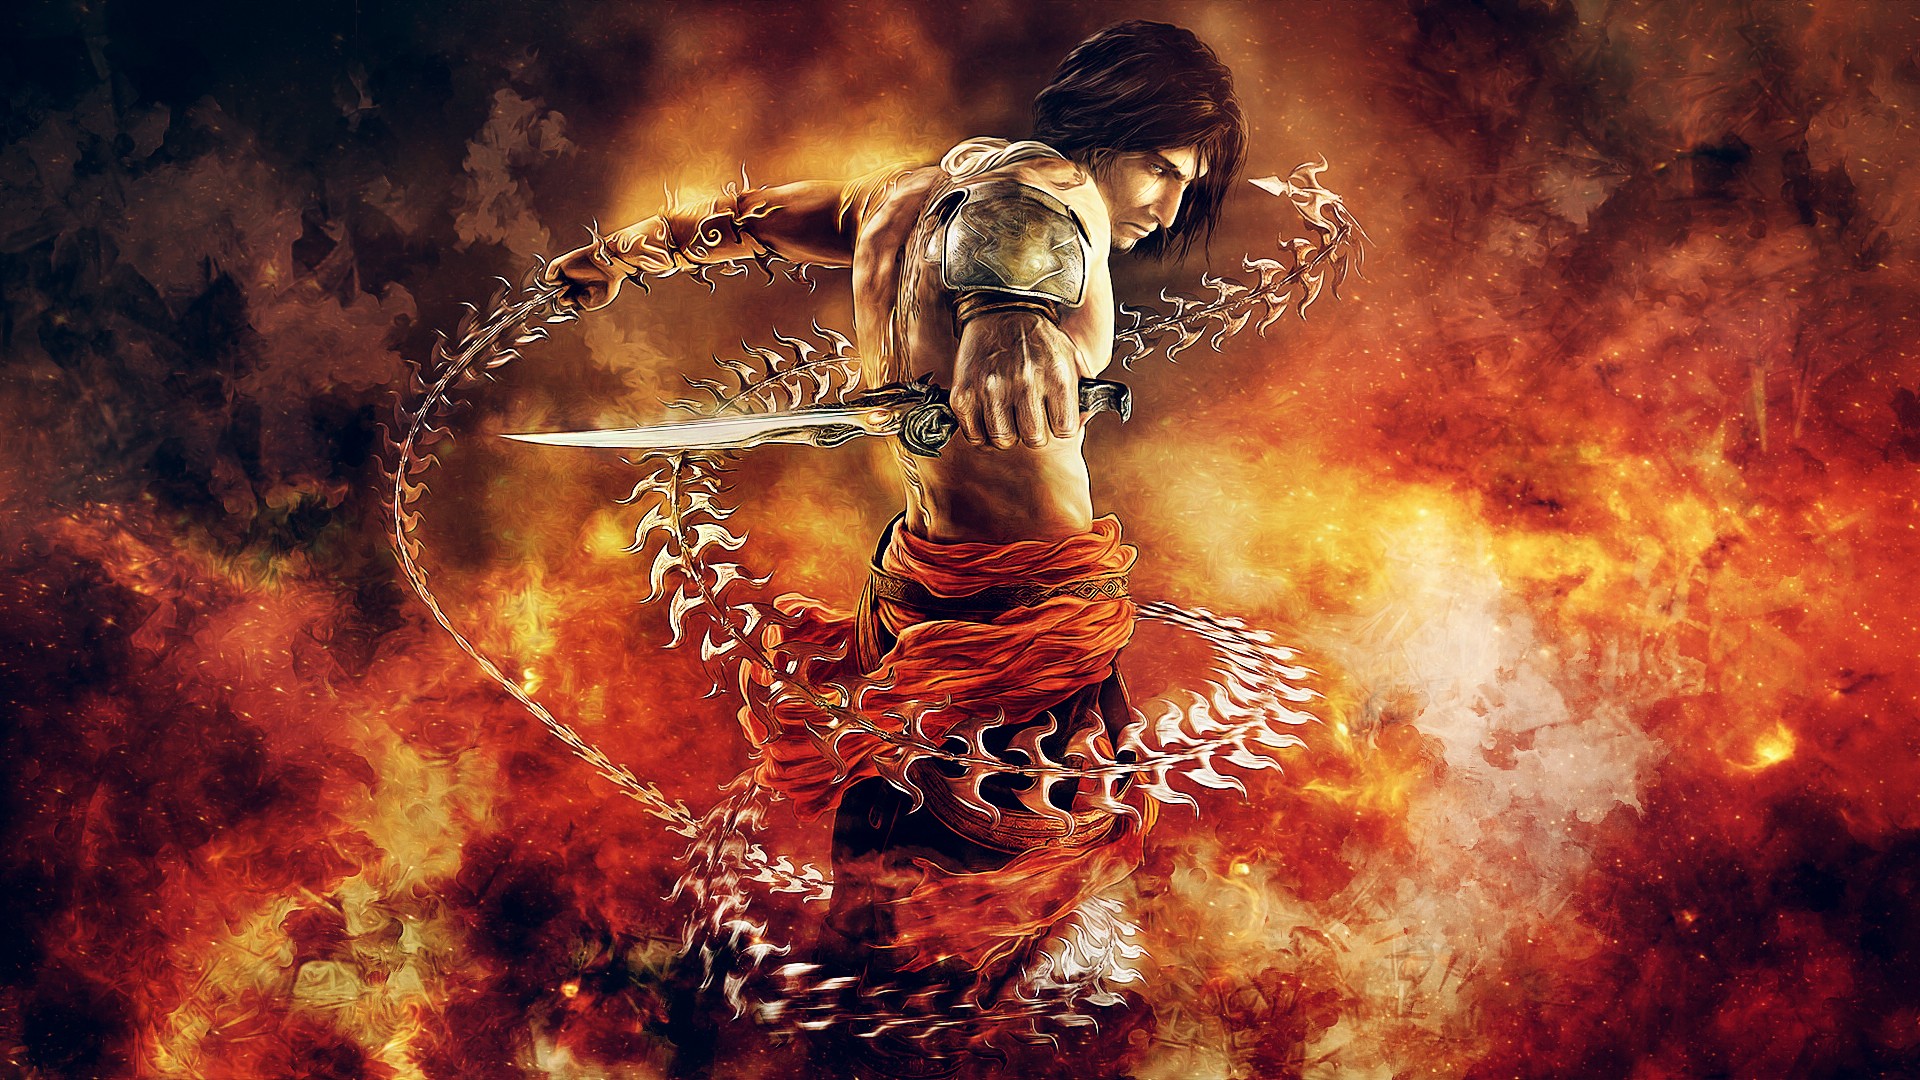 Prince Of Persia The Two Thrones HD Wallpaper Background Image